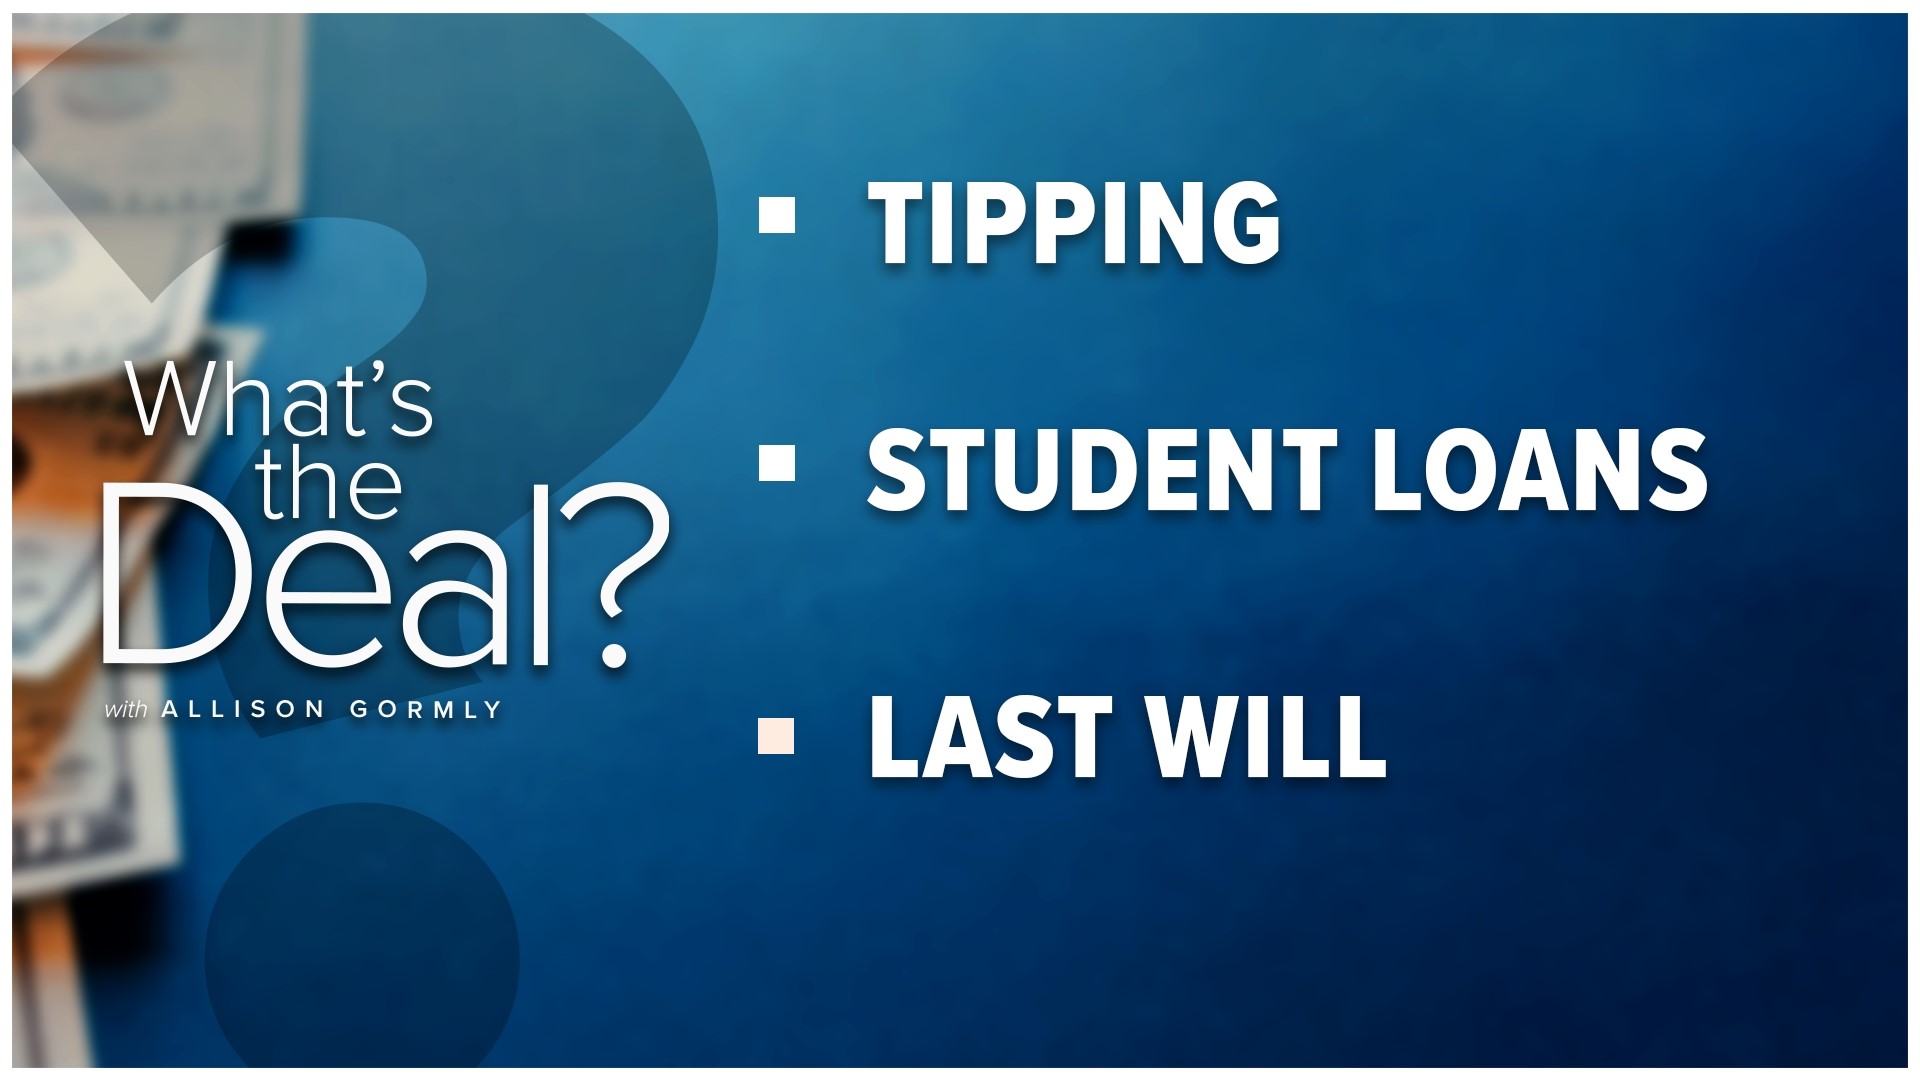 We look into what you need to know with tipping as more and more places ask for money, how you can save as you start paying back loans, and when to update your will.